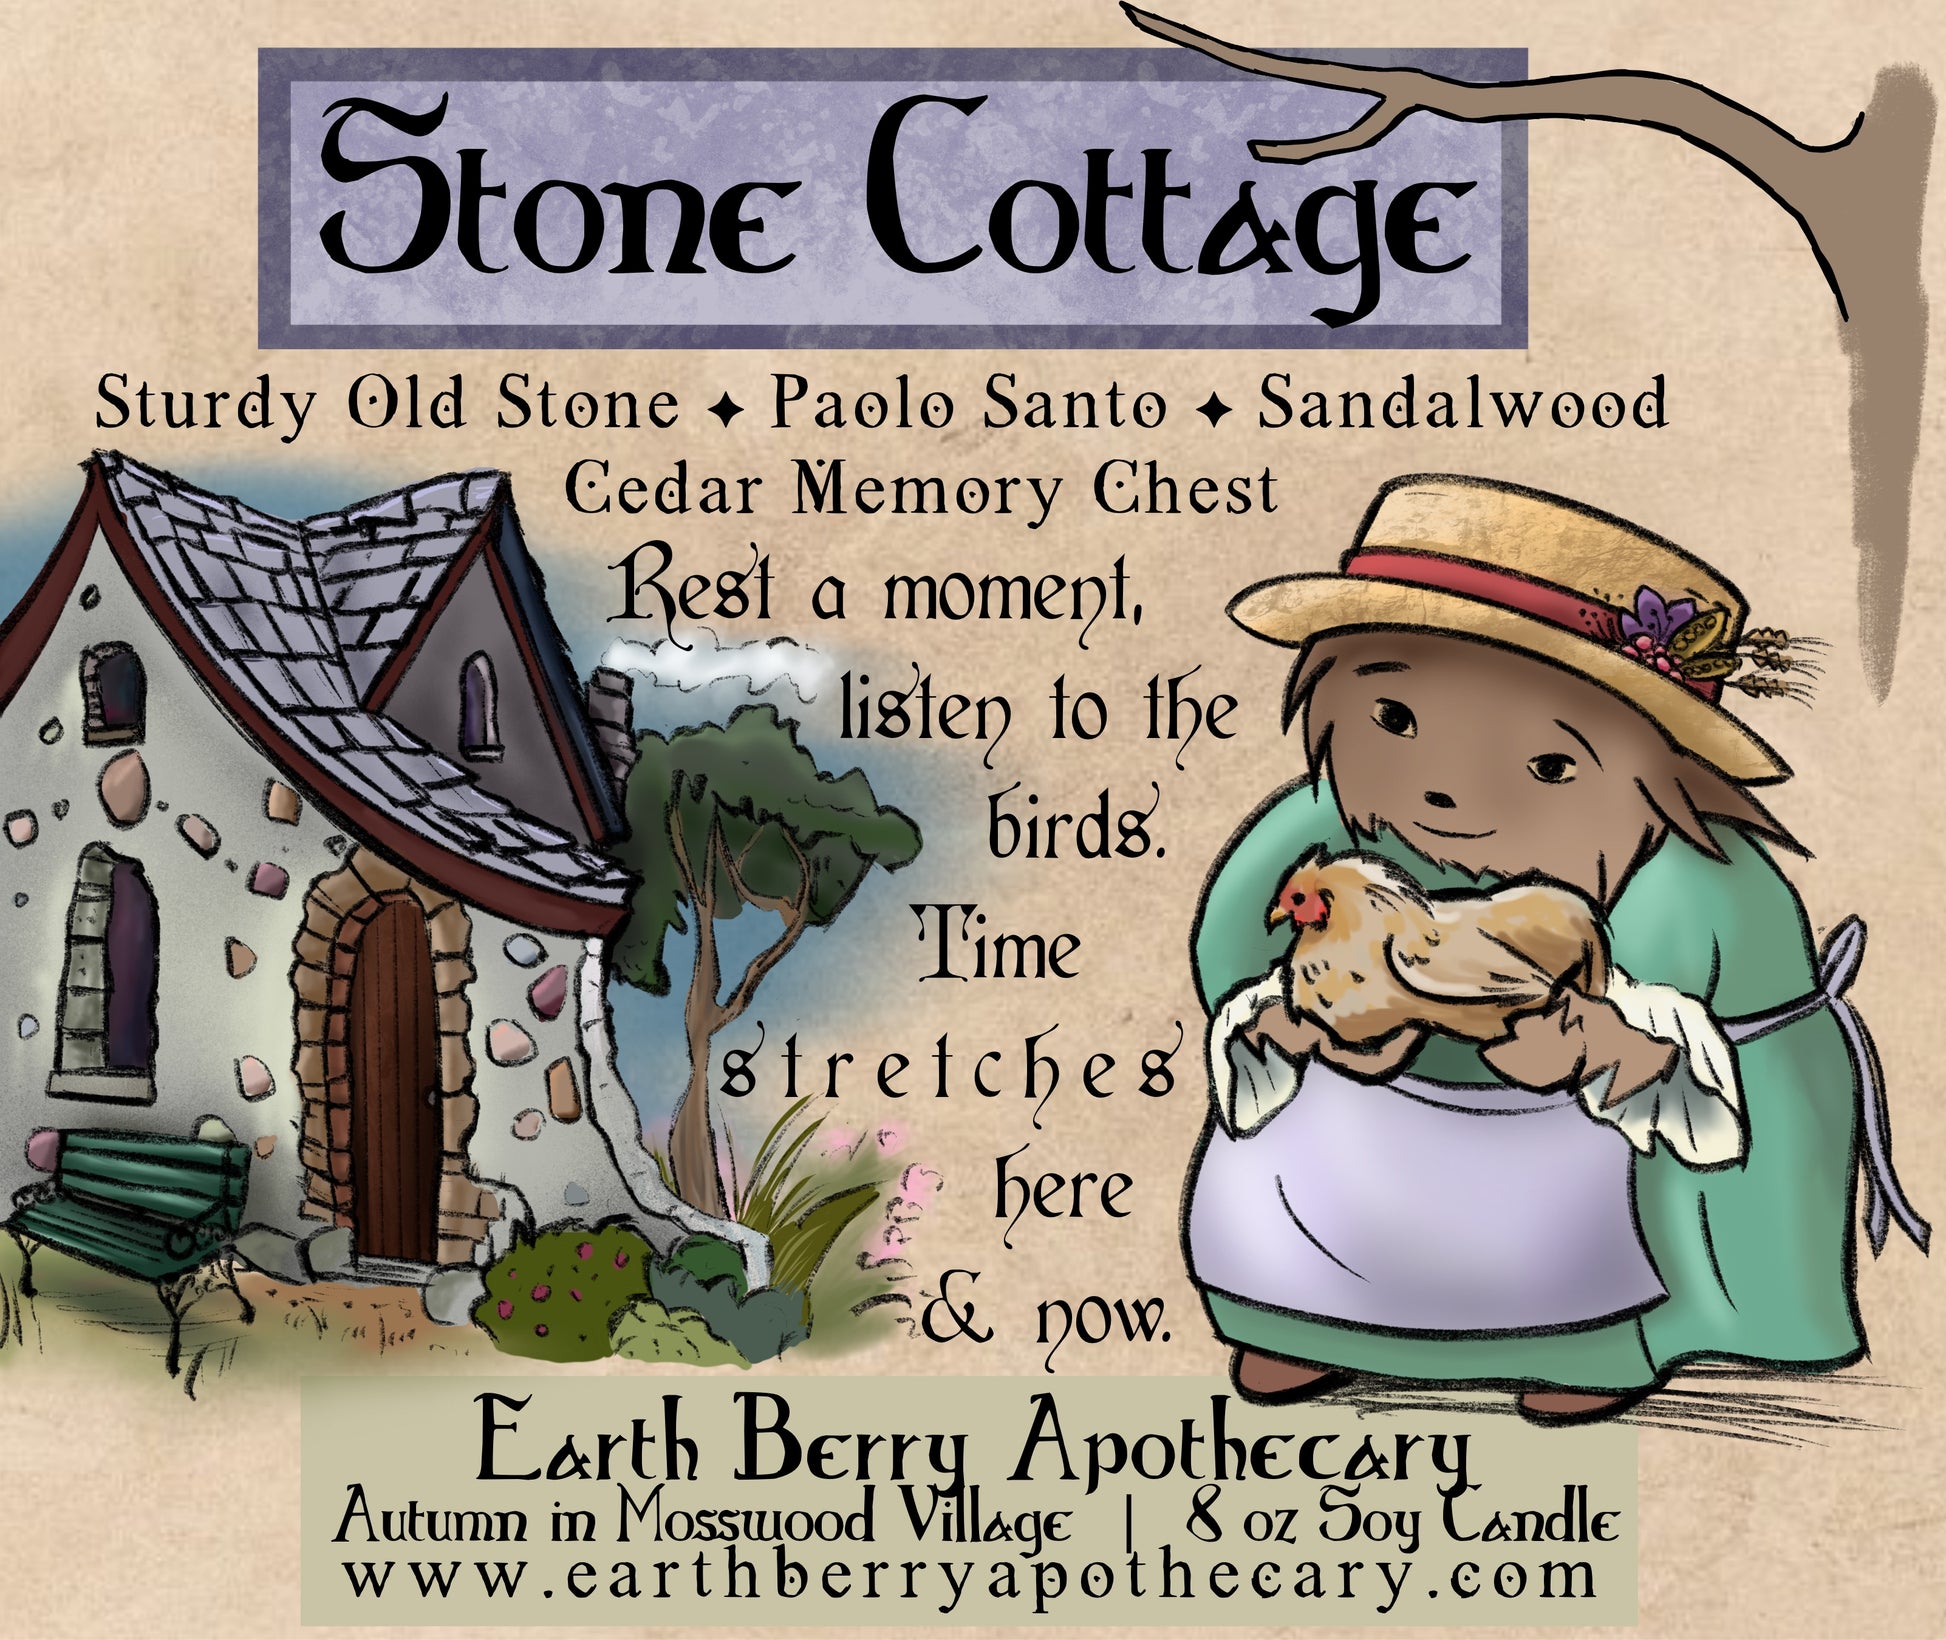 Stone Cottage soy candle with an old stone house and a hedgehog wearing a green dress, holding a chicken. The scent is stone, cedar, sandalwood, and paolo santo.